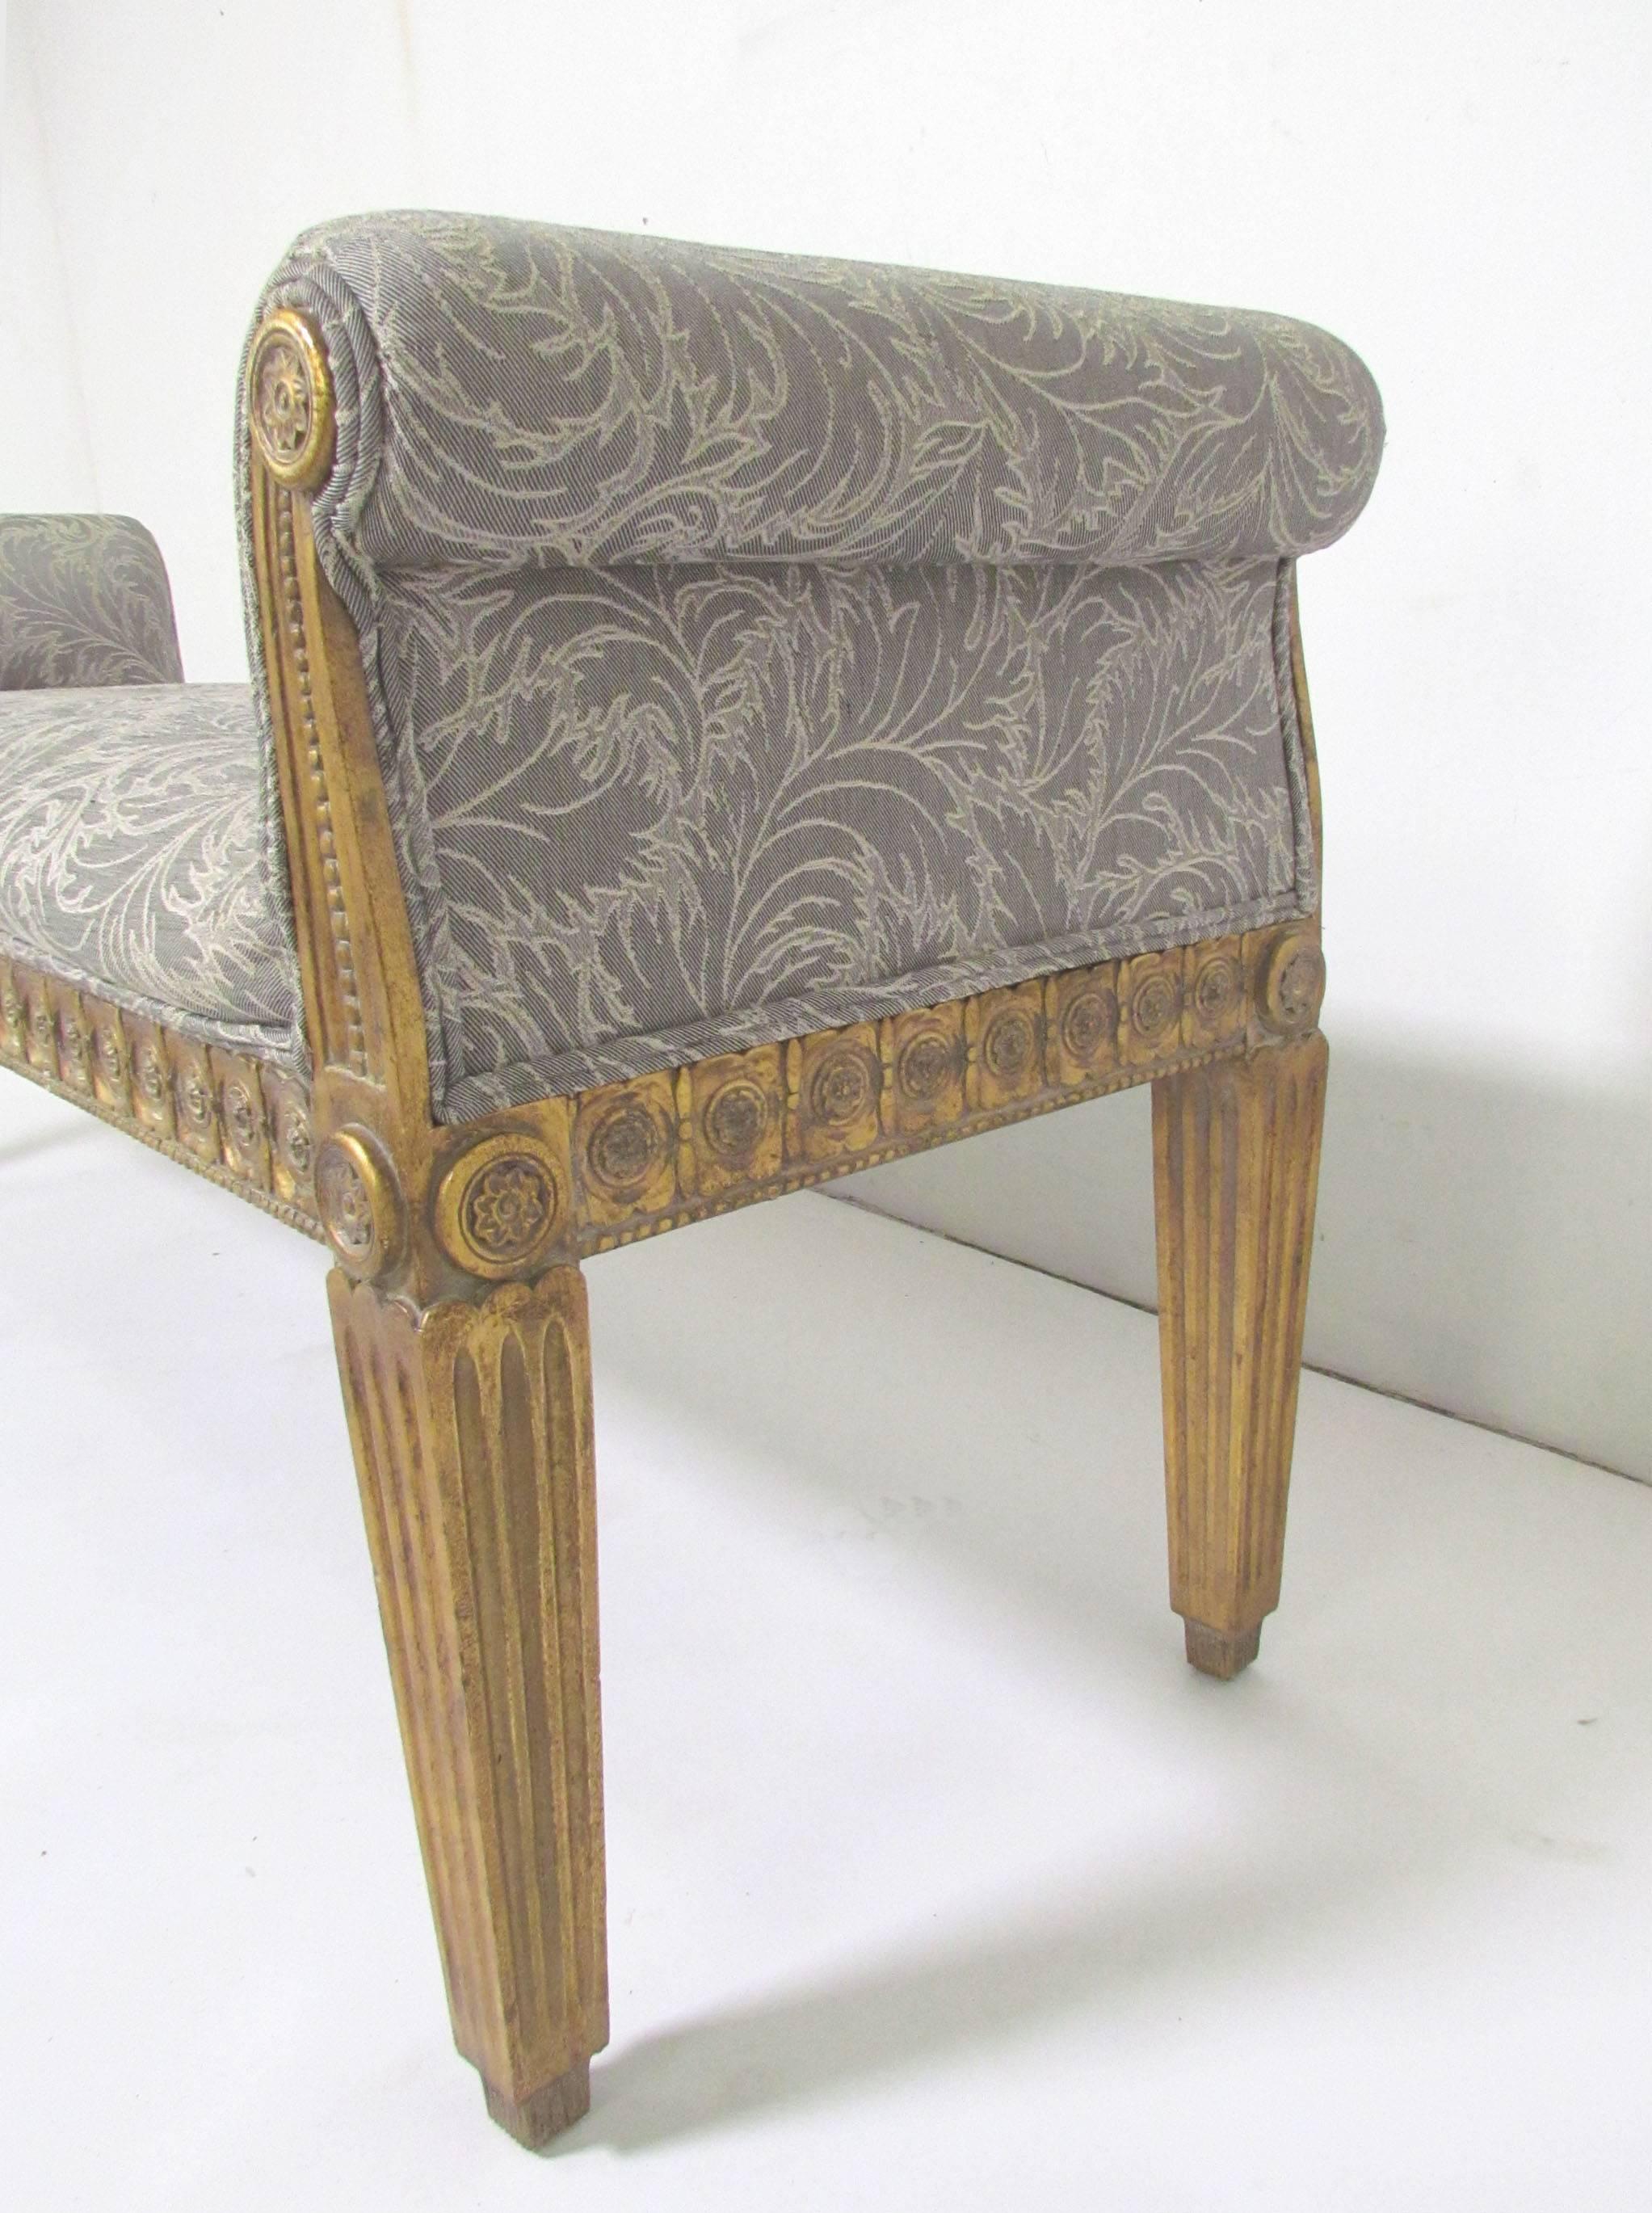 Late 20th Century Neoclassical Style Bench Carved Giltwood Frame by Meyer Gunther Martini